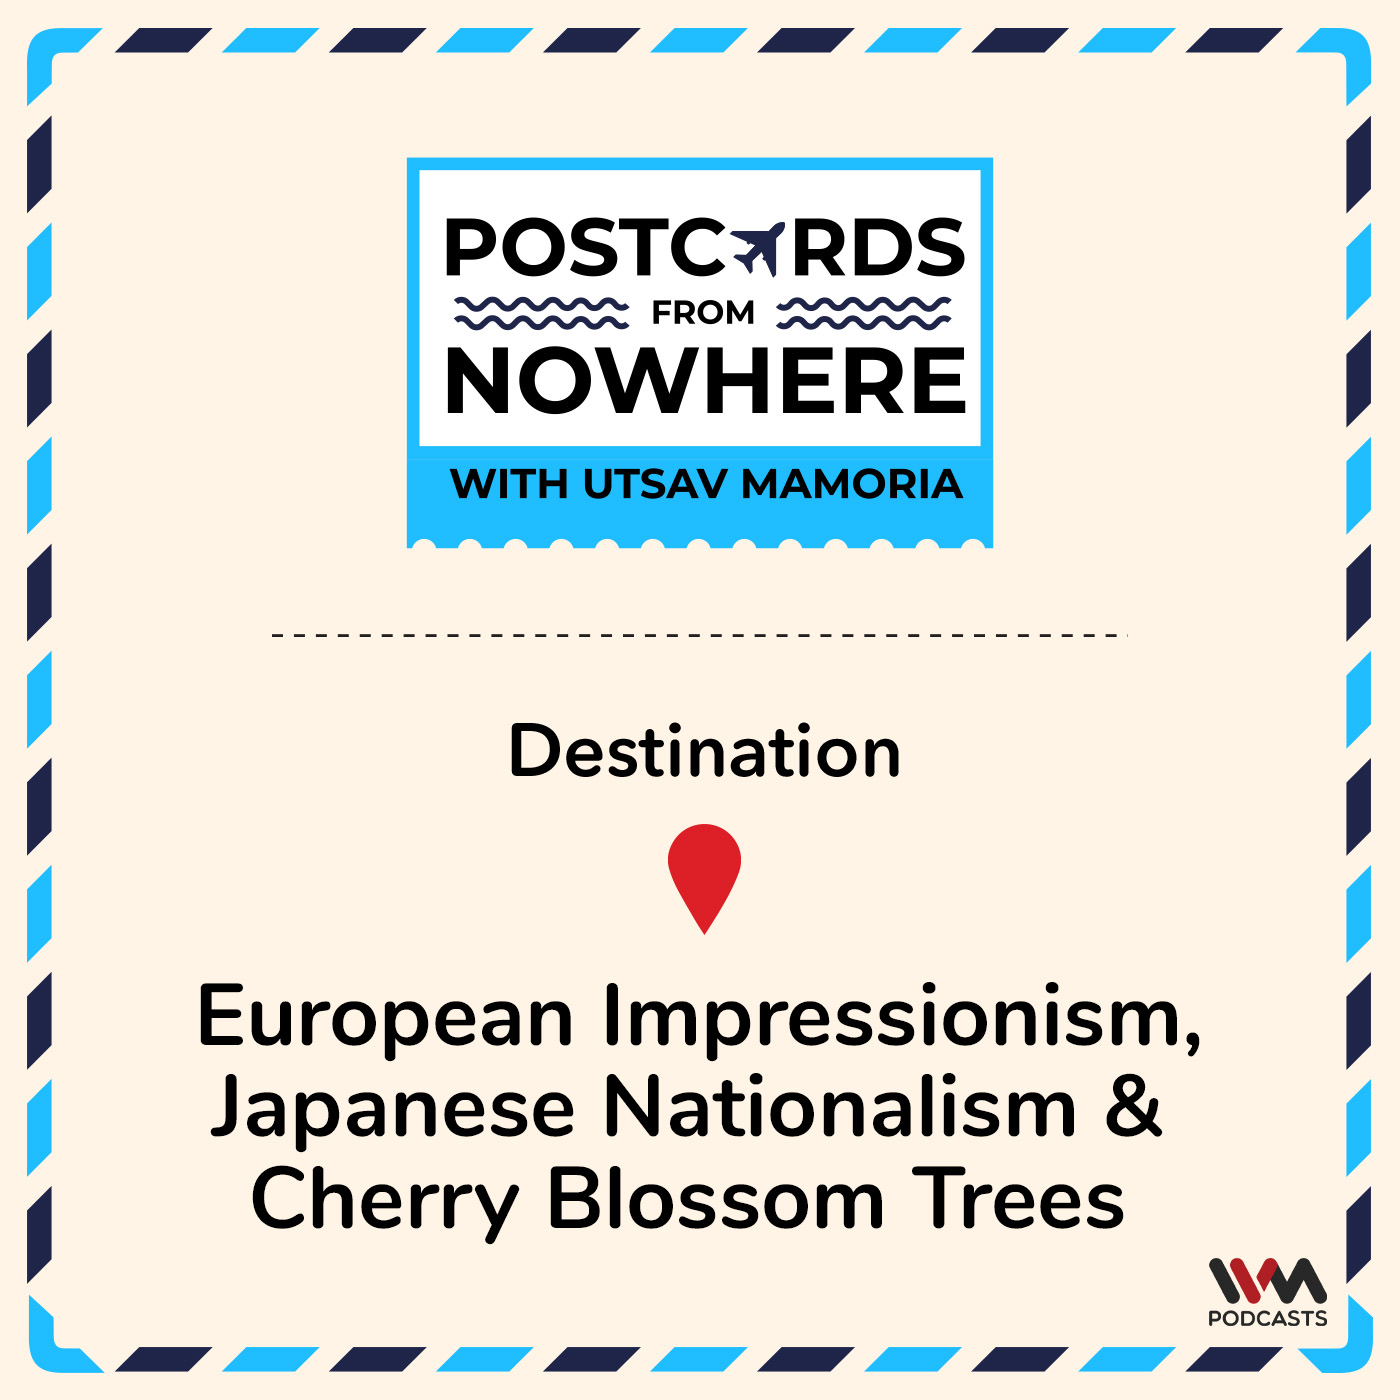 European Impressionism, Japanese Nationalism and Cherry Blossom Trees